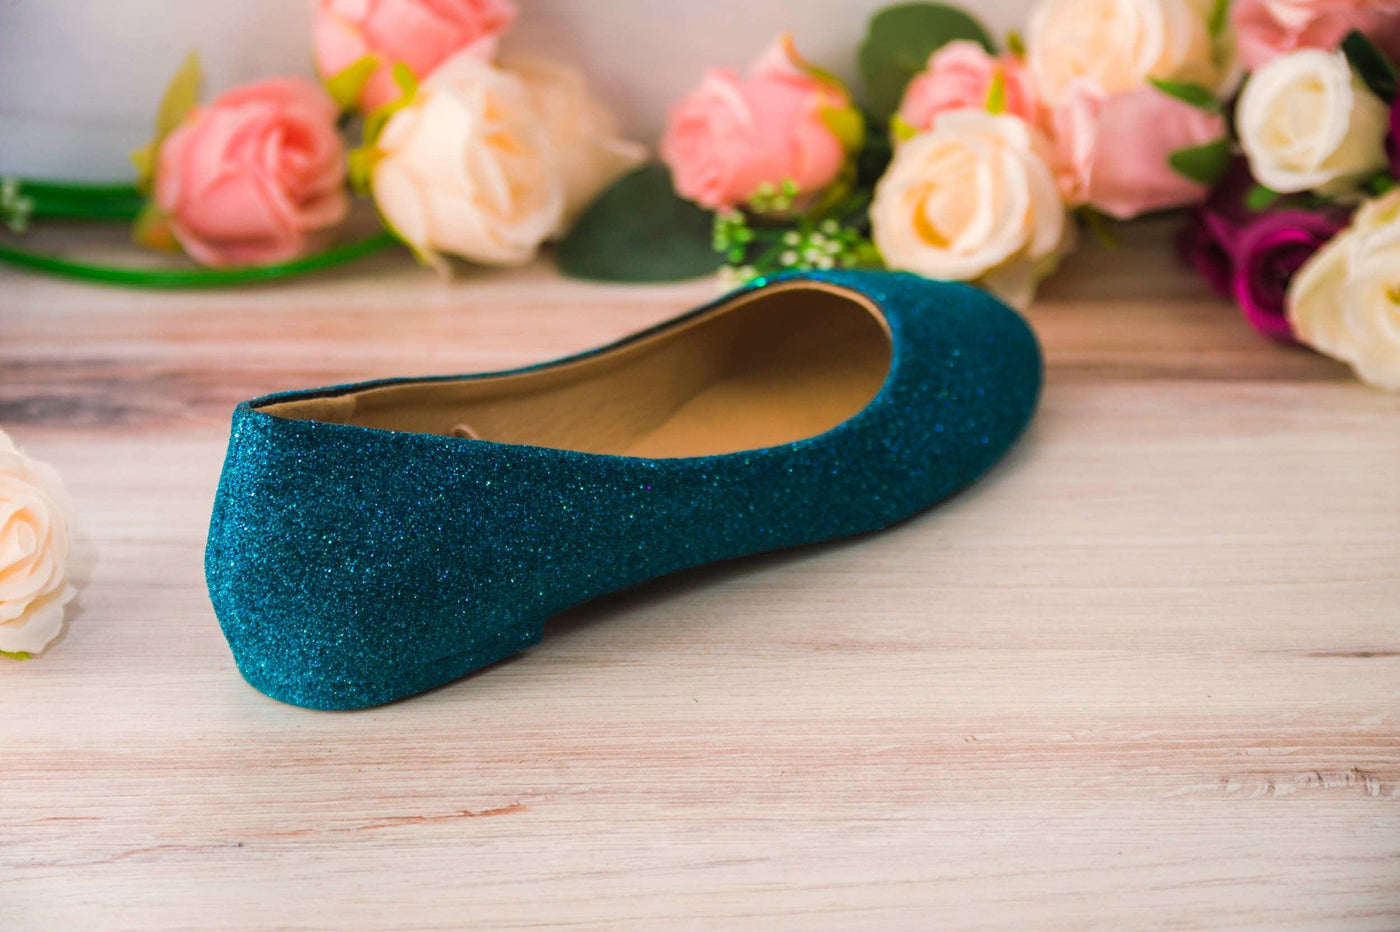 Peacock Blue Glitter Ballet Flats, Custom Wedding Shoes, Wedding Shoes, Bride, Bridesmaid, Prom, Gifts for Her